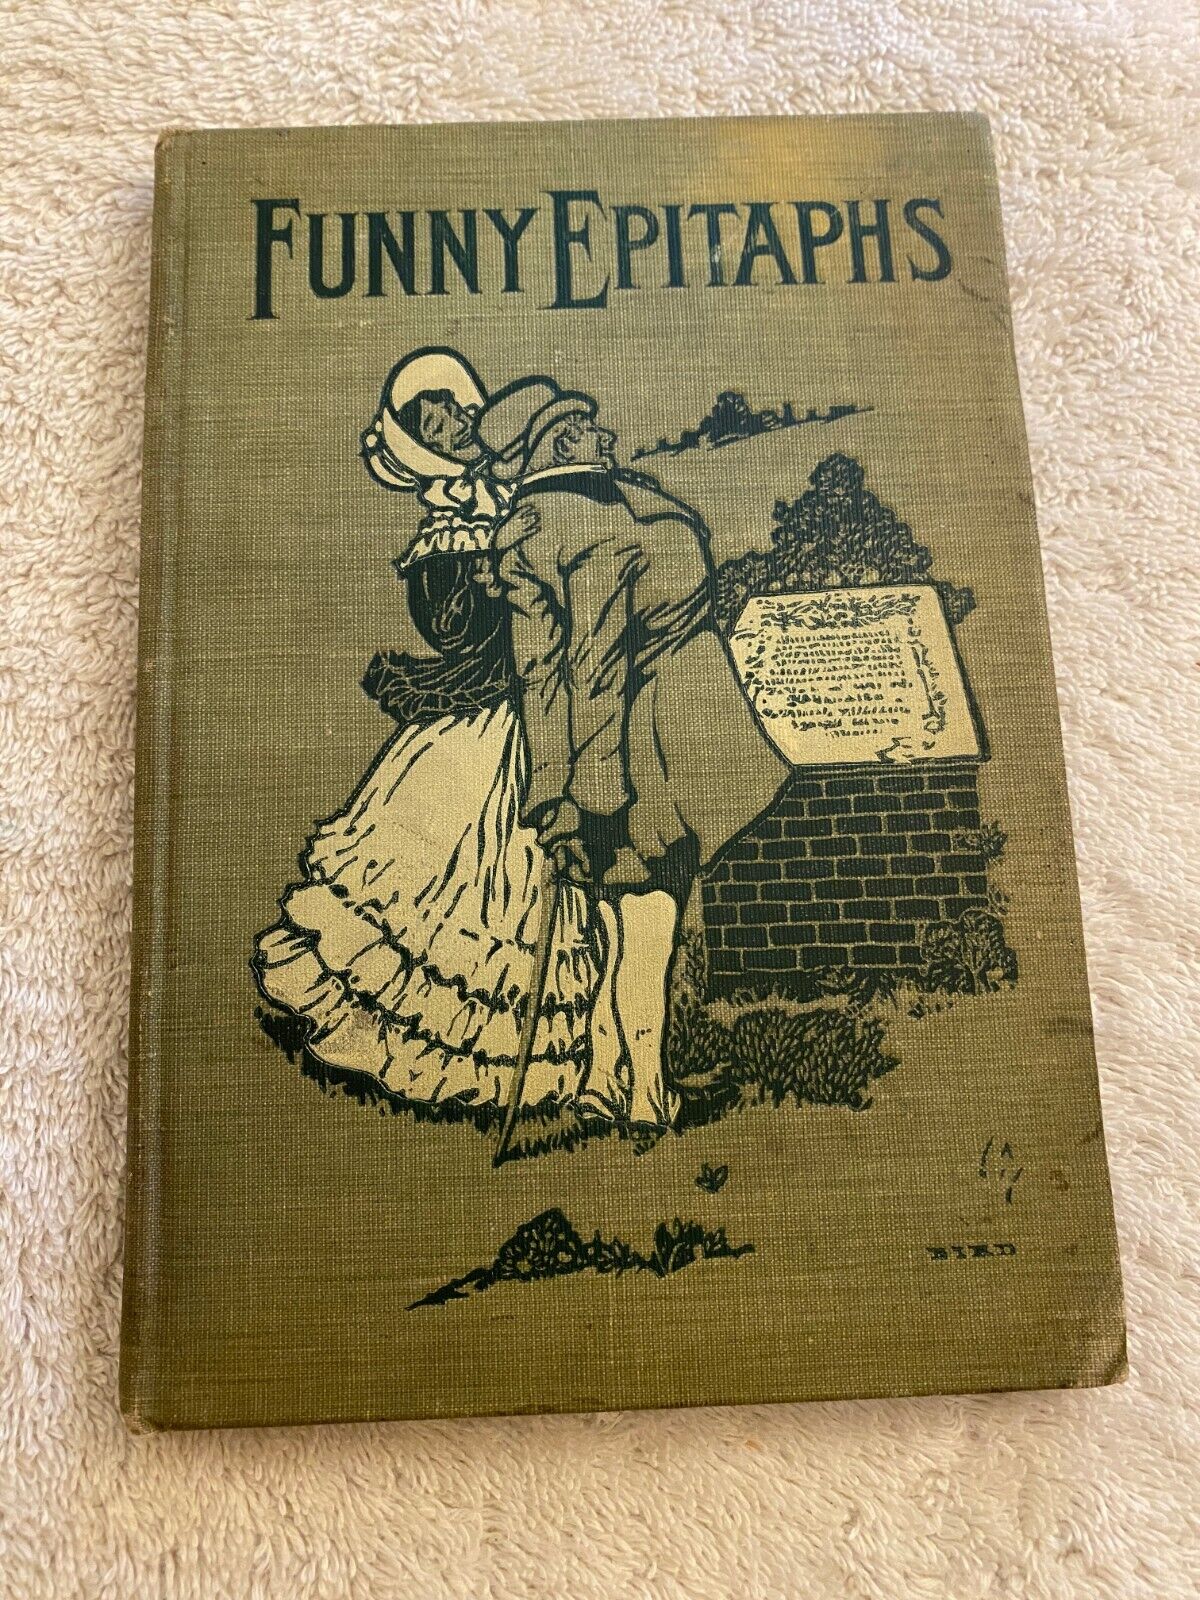 Funny Epitaphs, Boston, MA 1902 William C. Edwards, See Owner's Note Inside Book